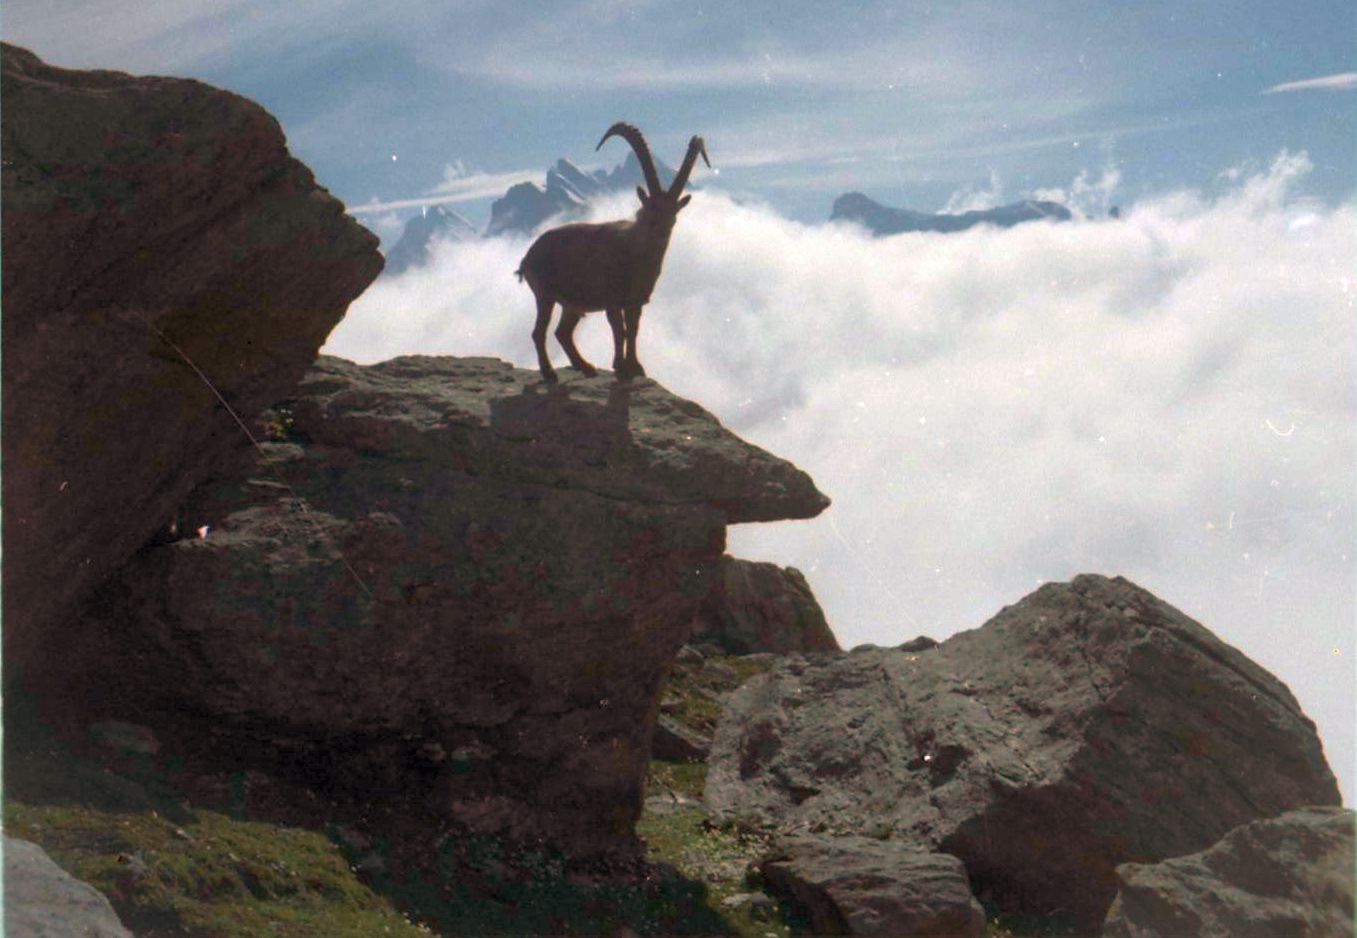 Ibex on ascent of the Jungfrau - the original route of ascent